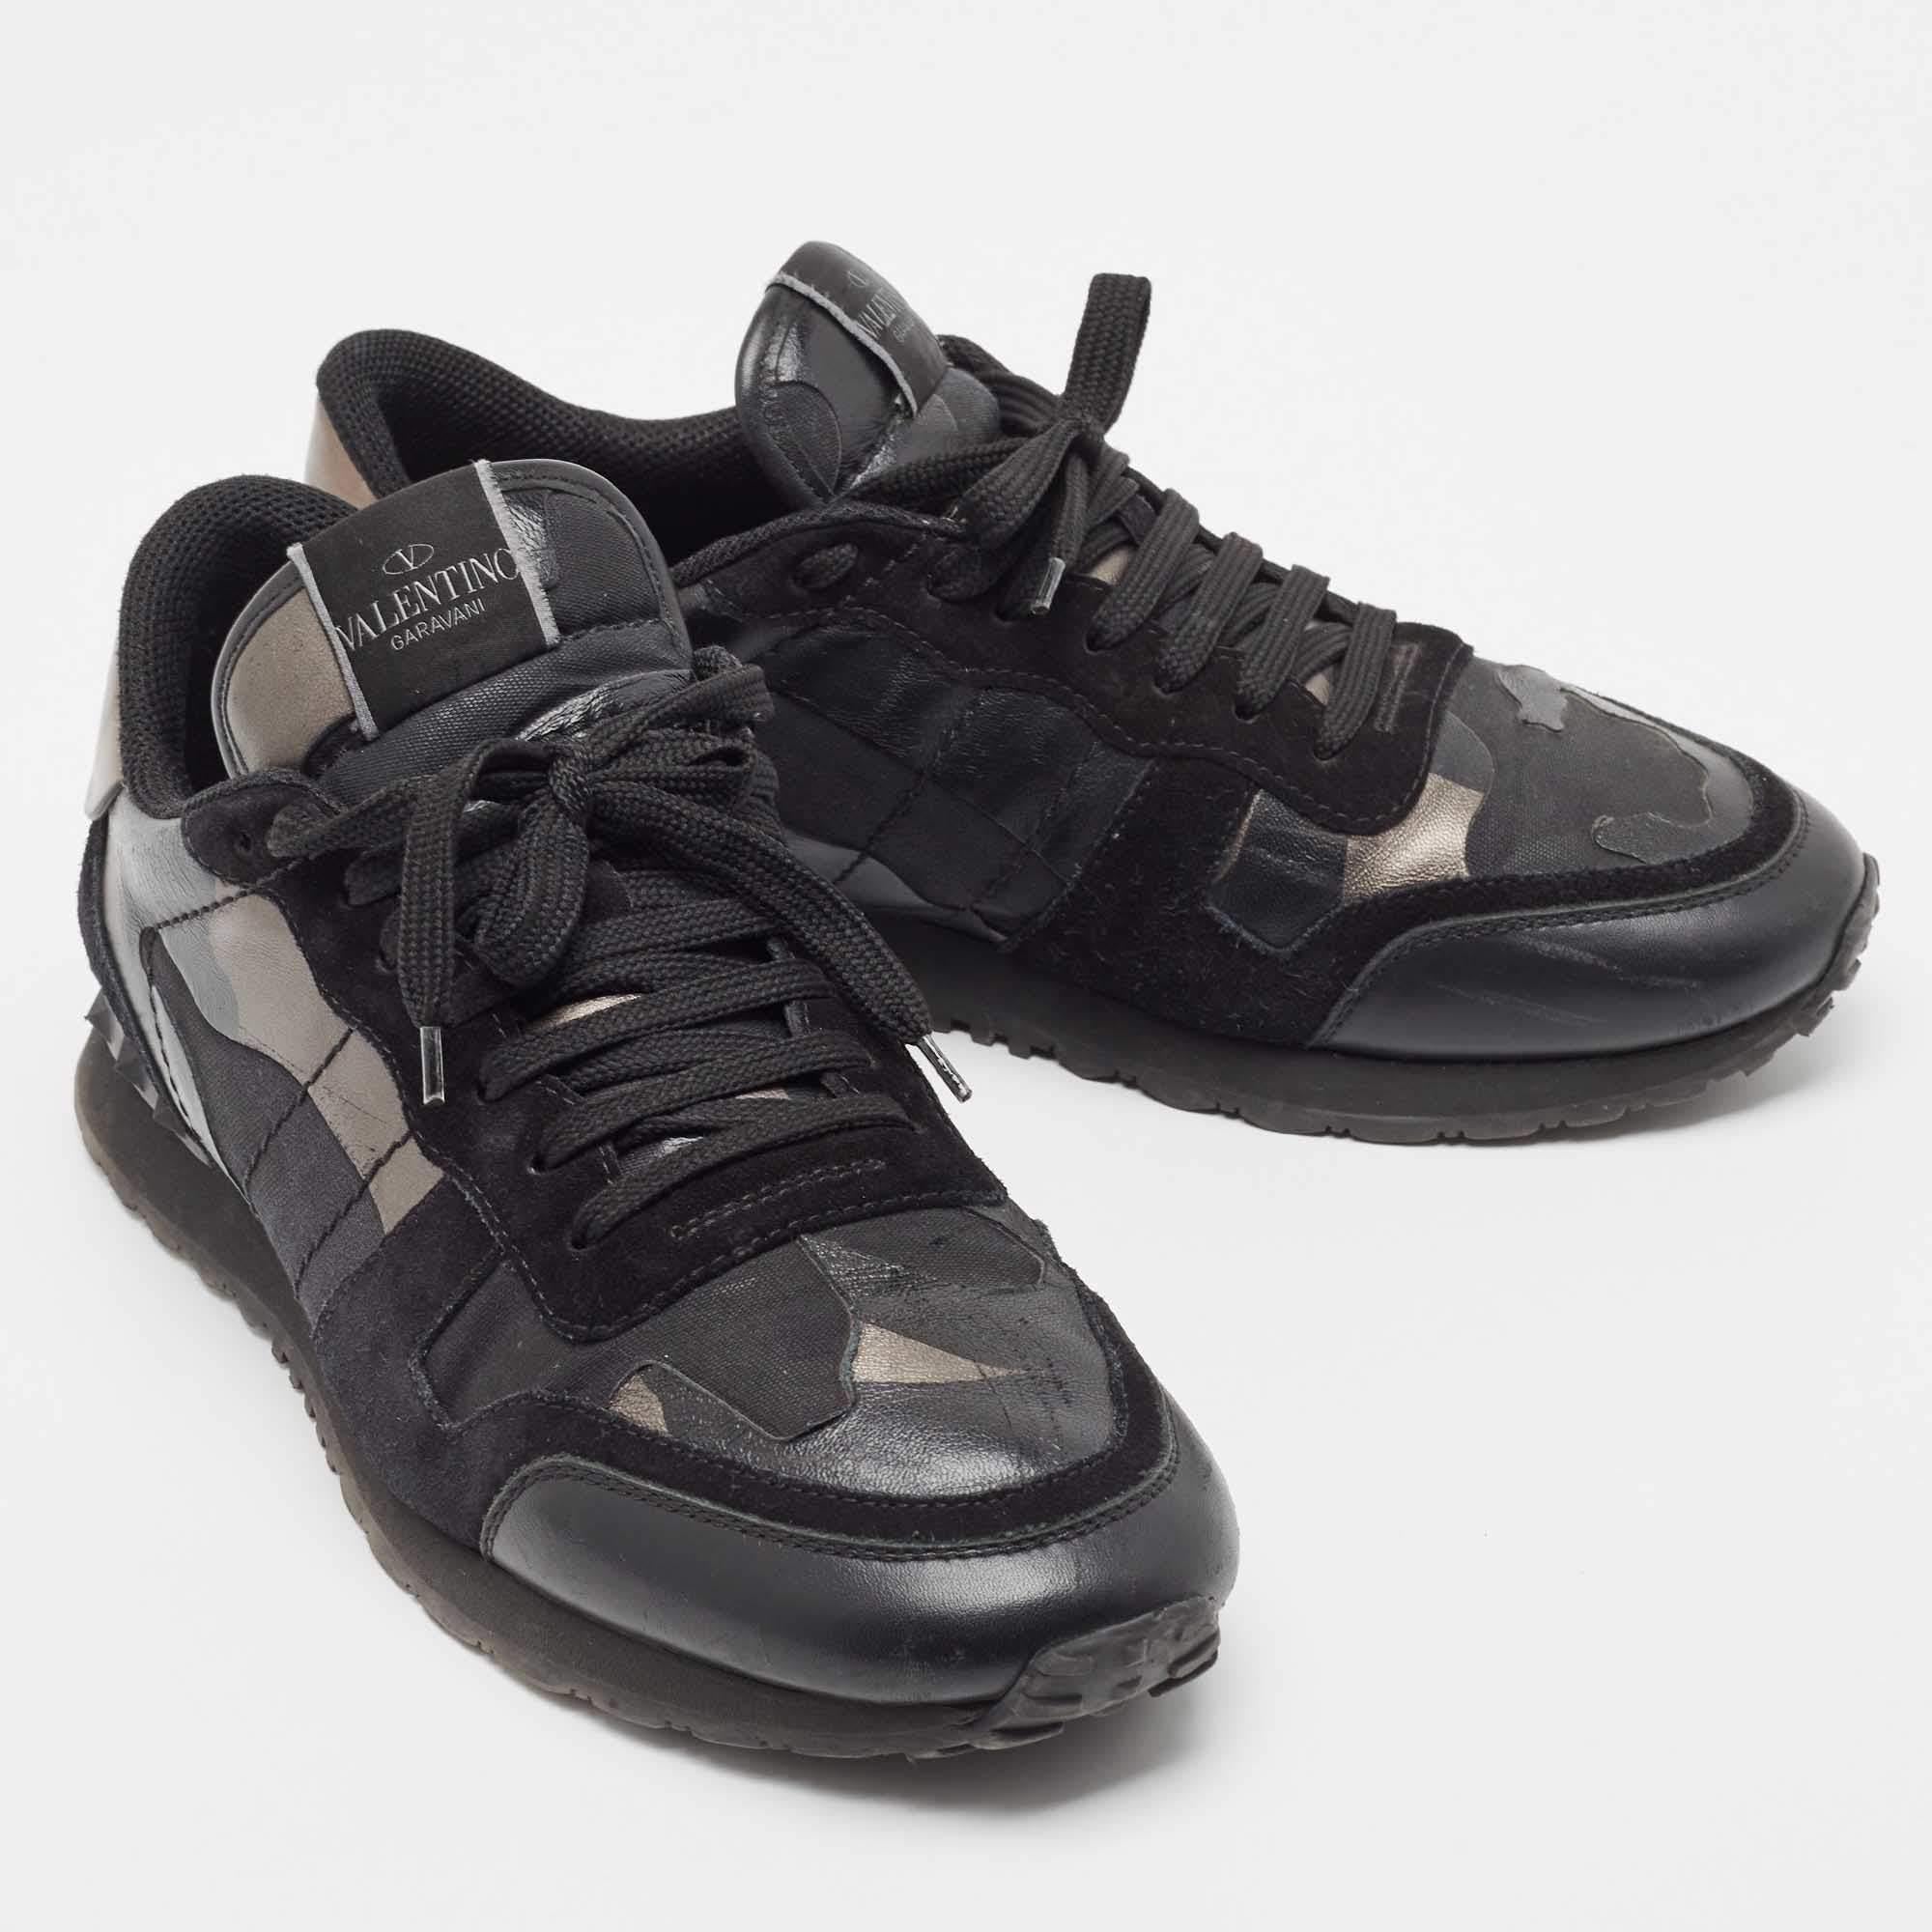 Valentino Black/Metallic Leather and Suede Rockrunner Sneakers Size 43 In Good Condition For Sale In Dubai, Al Qouz 2